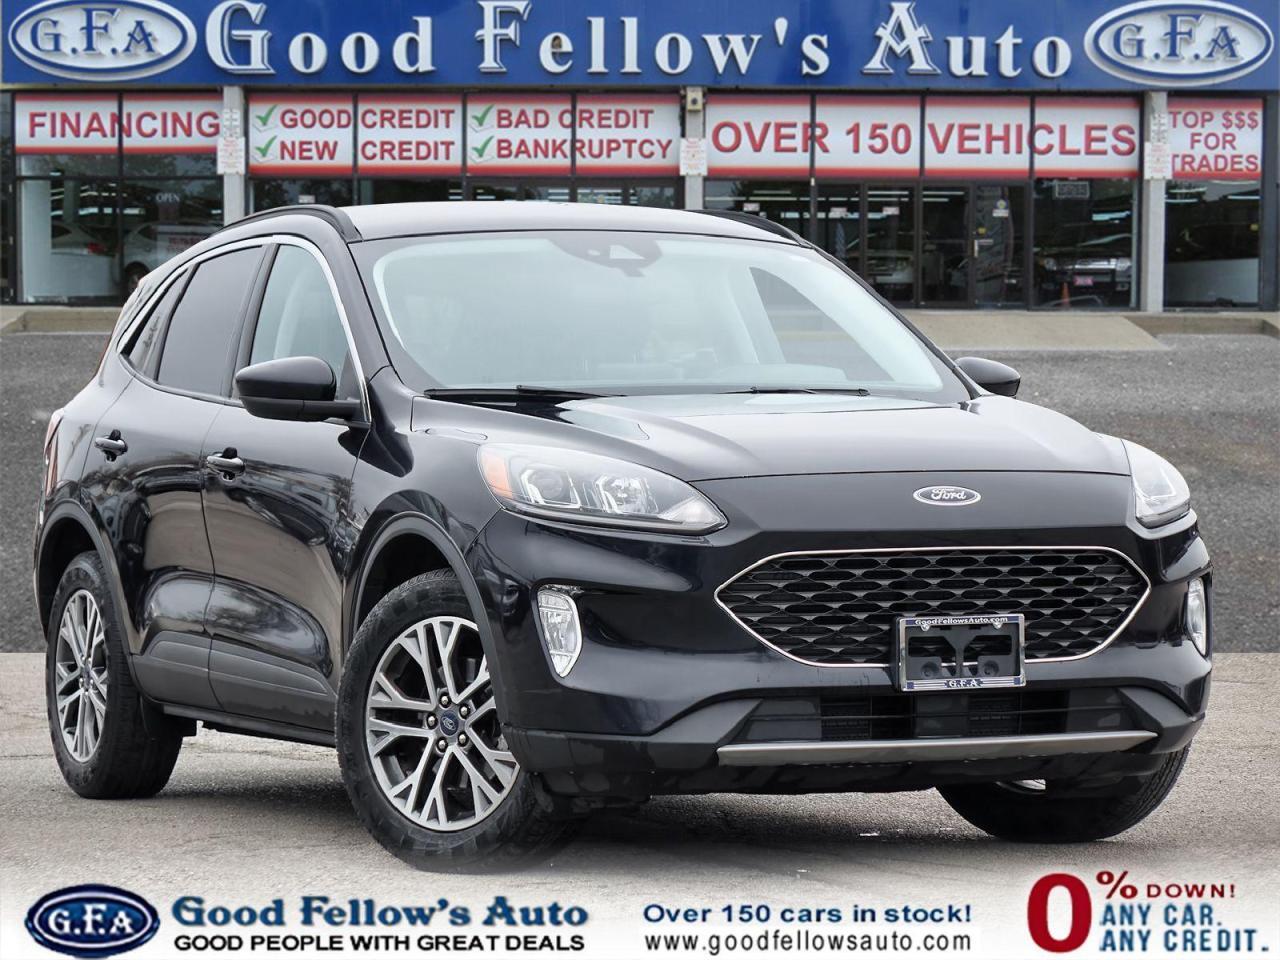 2021 Ford Escape SEL MODEL, ECOBOOST, AWD, LEATHER SEATS, REARVIEW